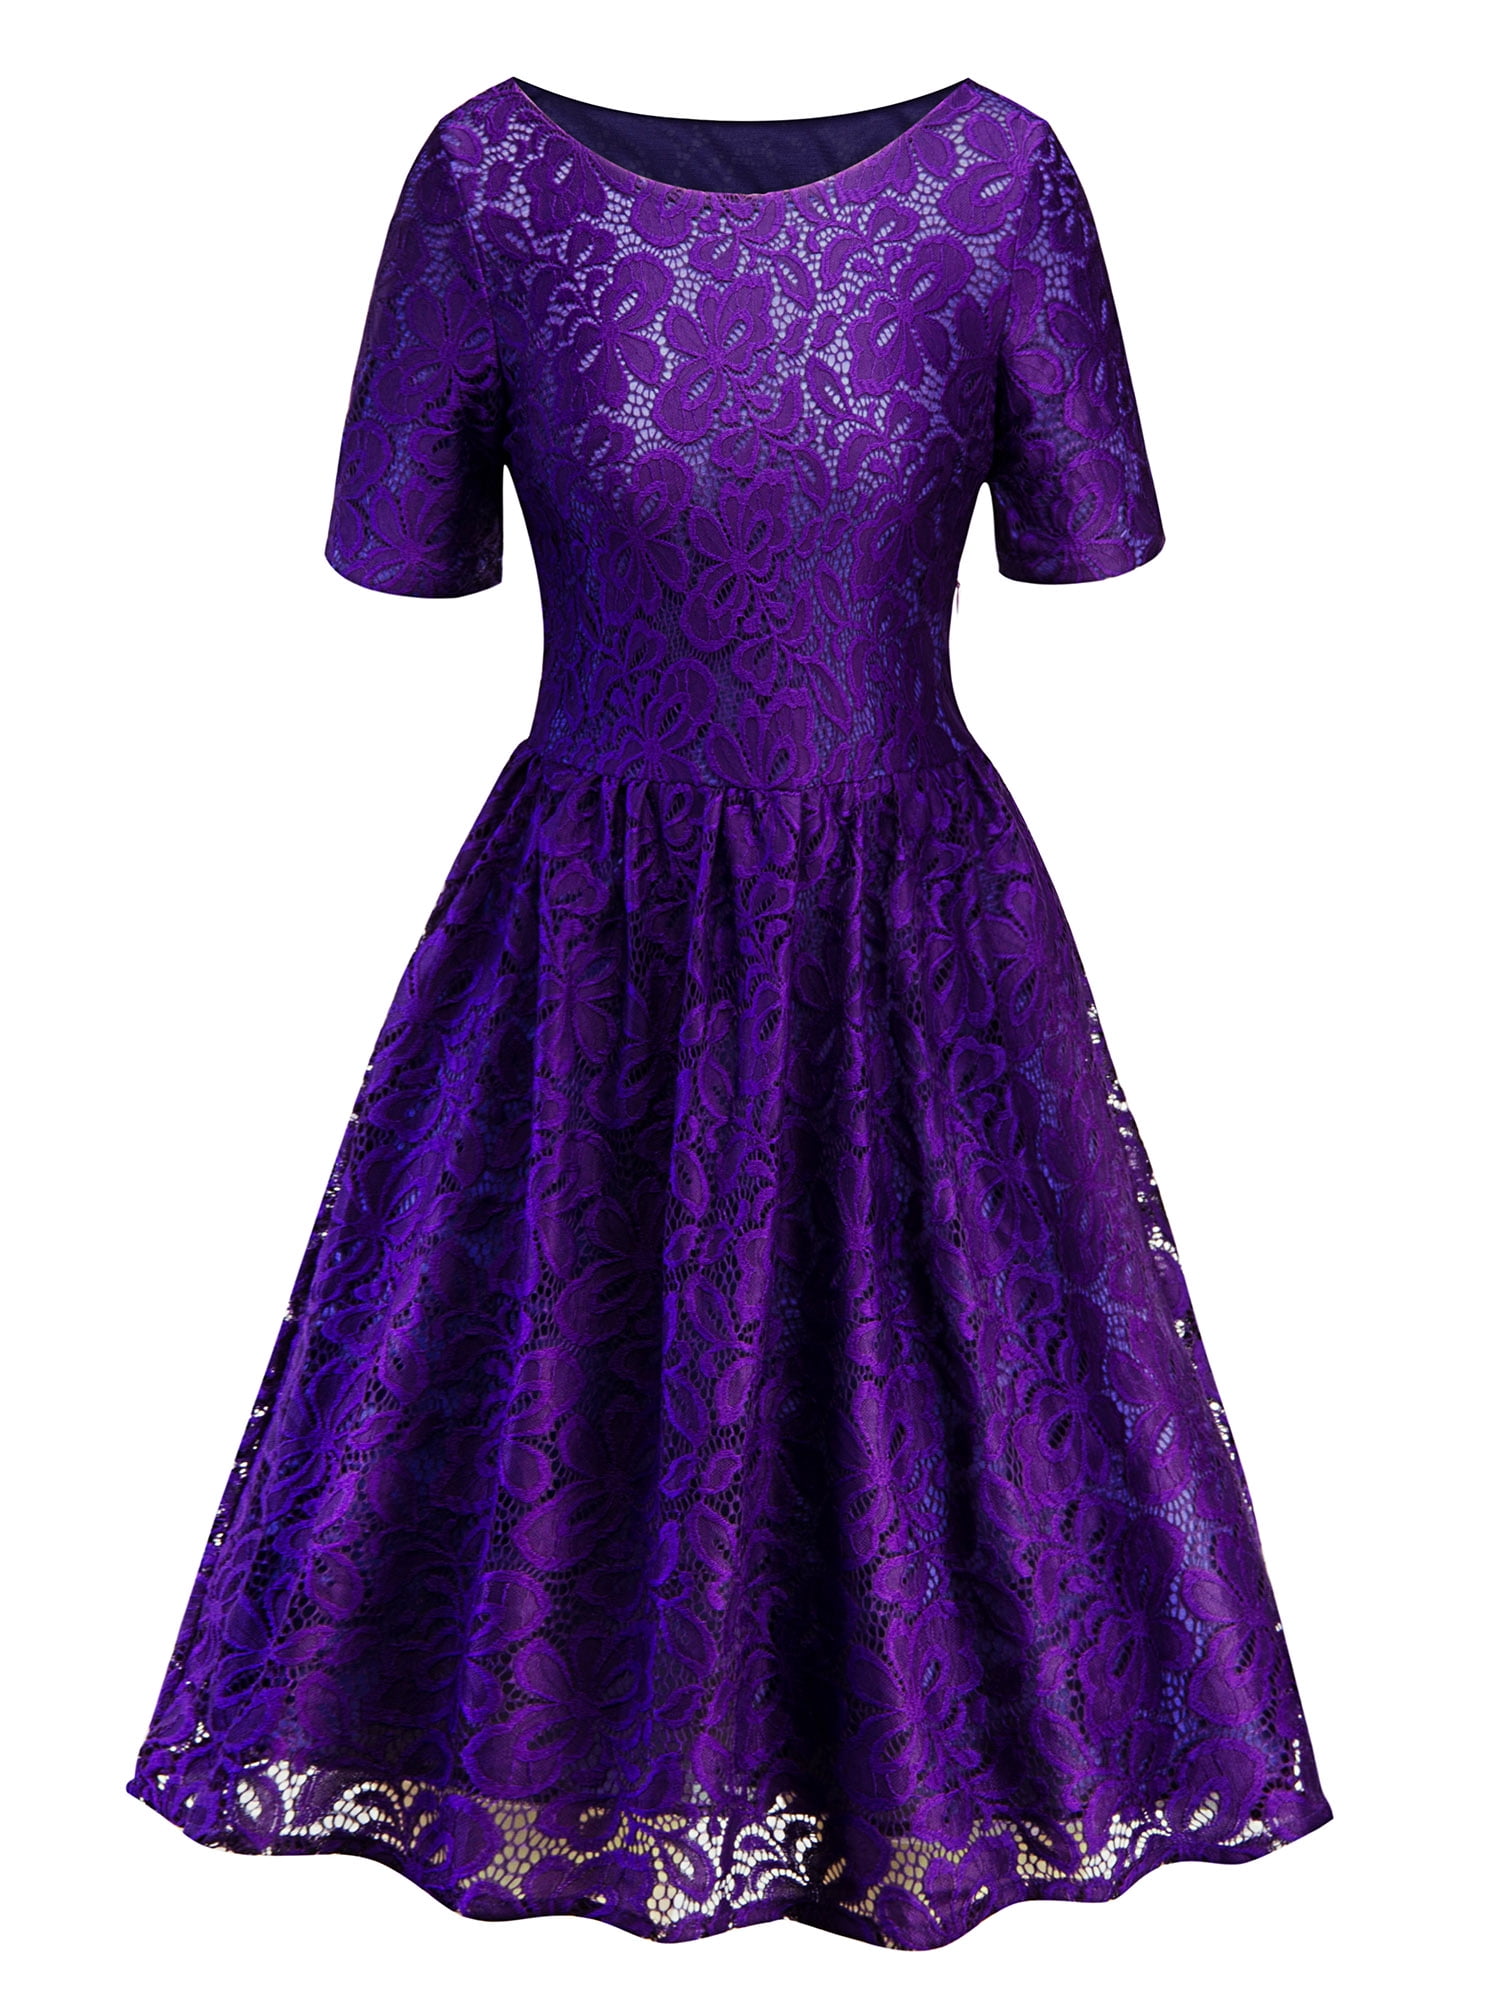 Womens 50s 60s Vintage Lace Retro Rockabilly Party Evening Swing Skater Dresses 